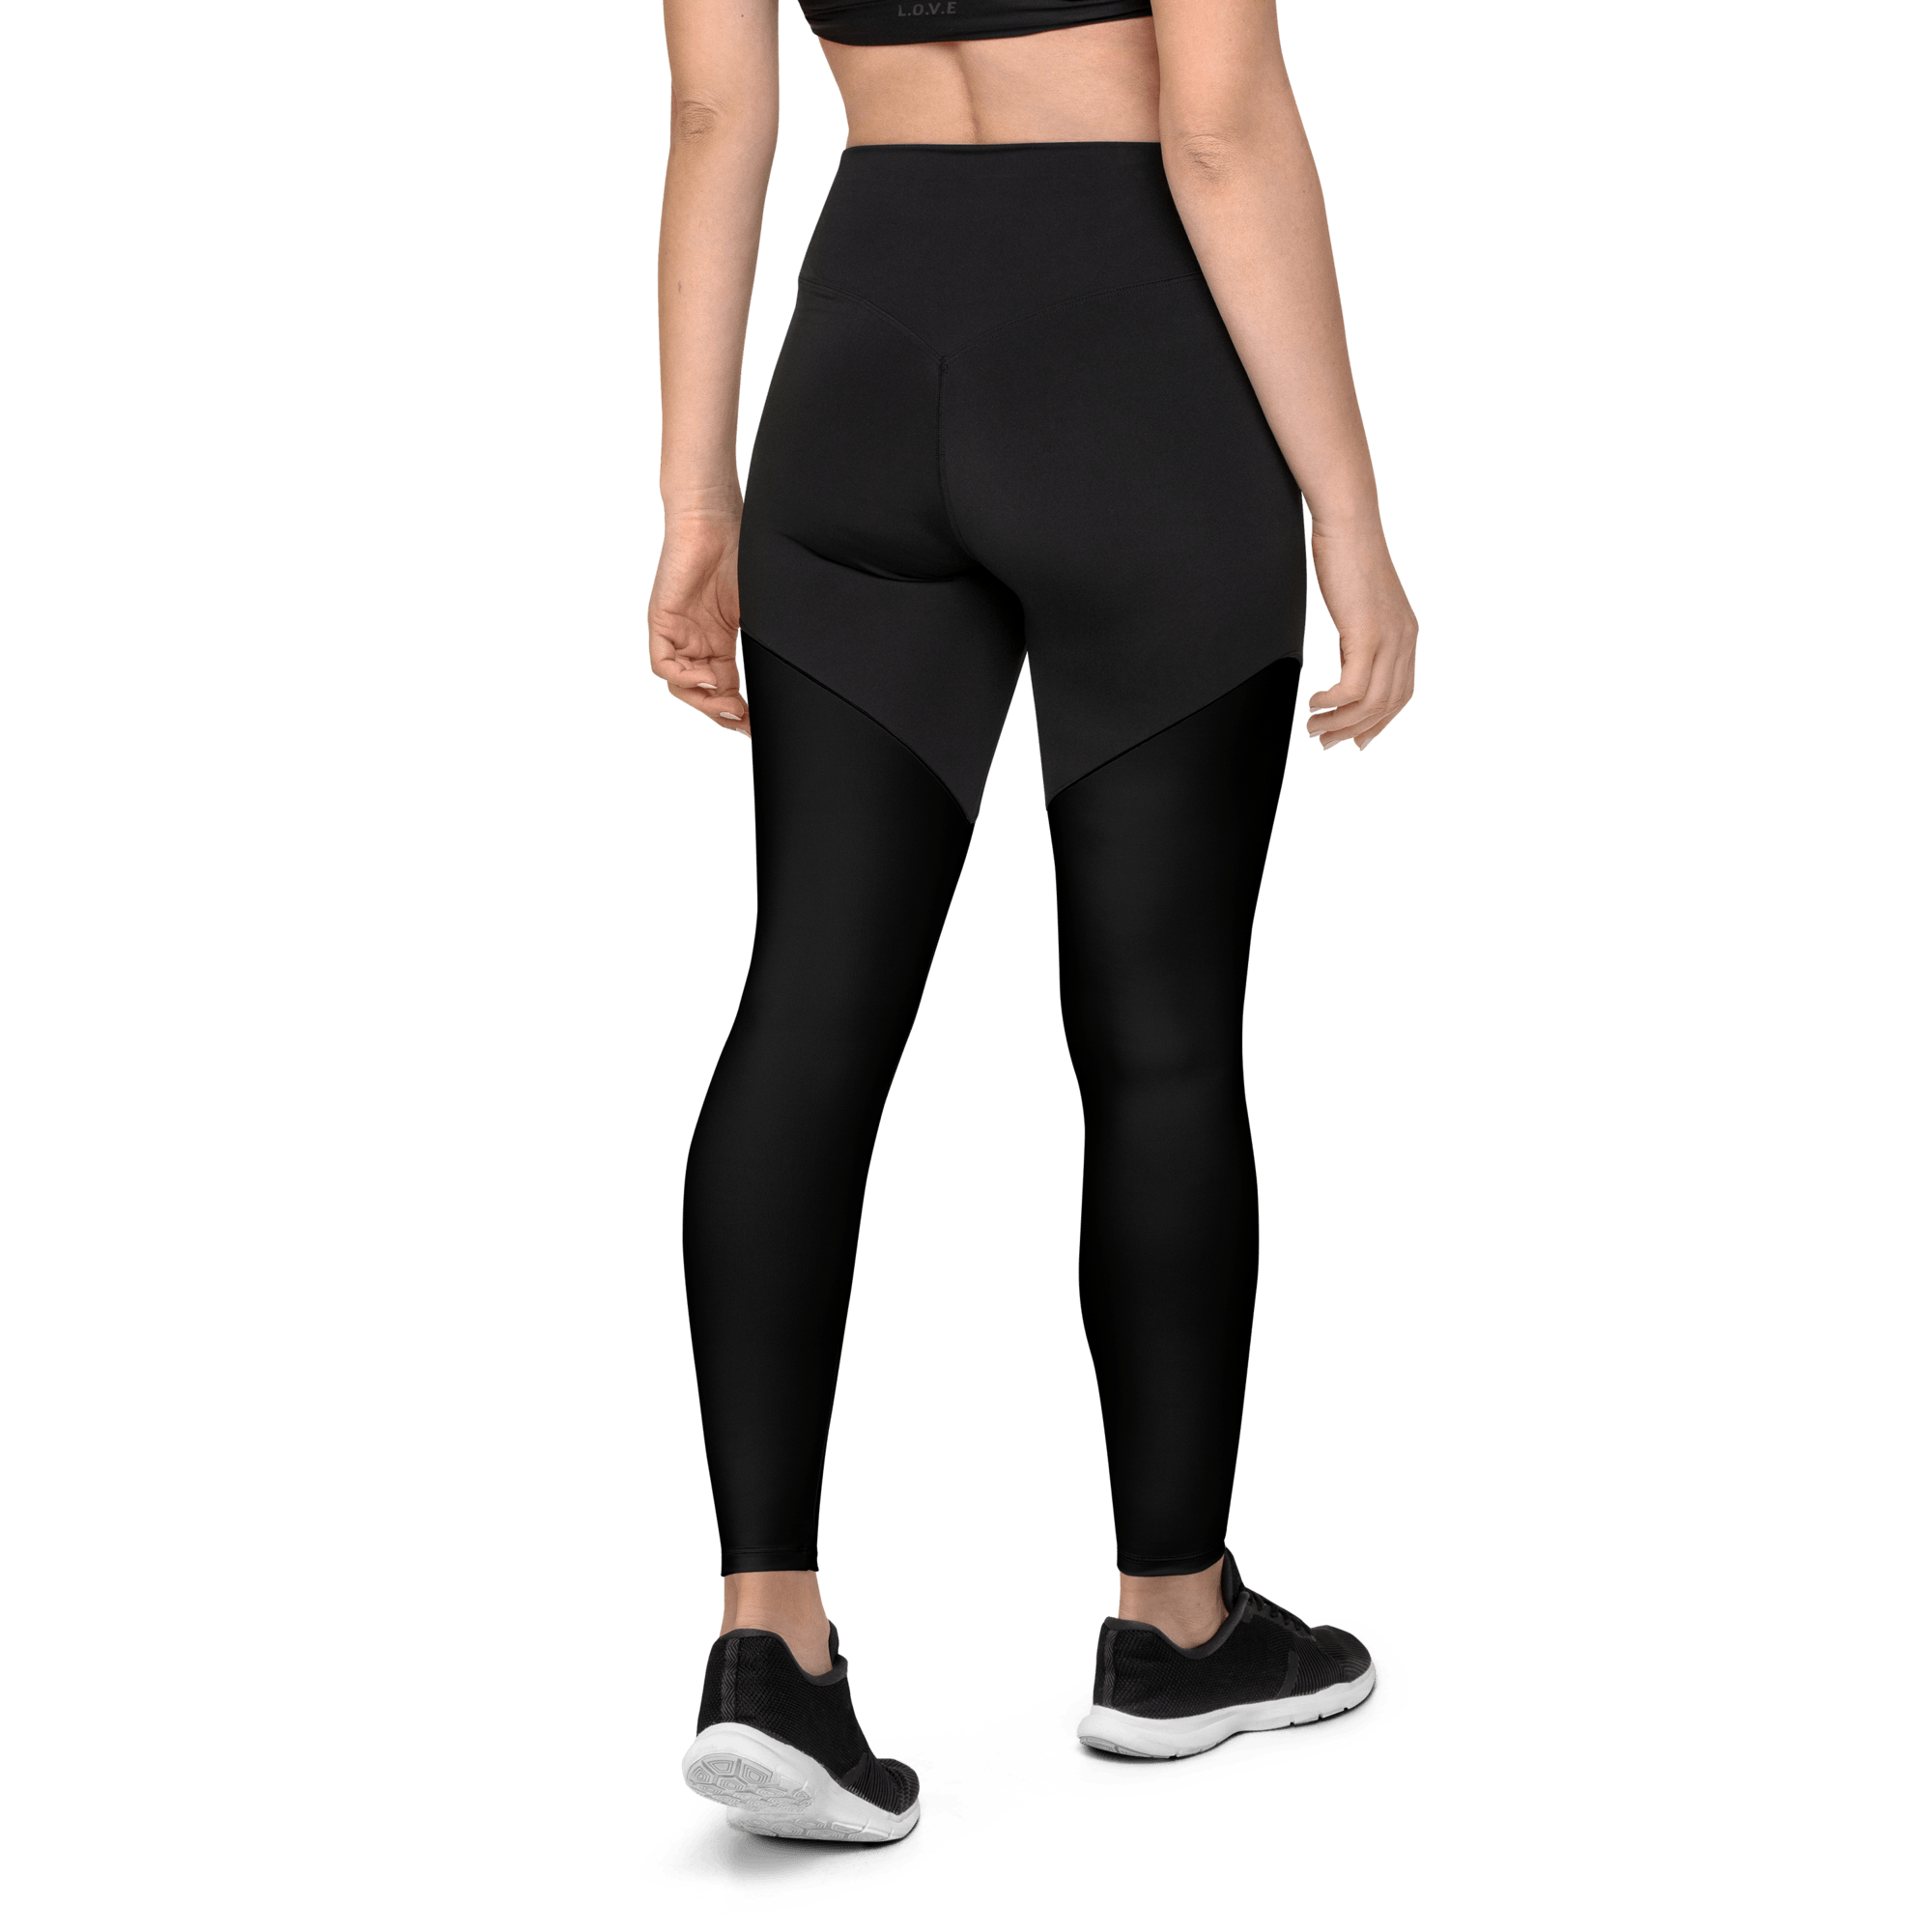 Accessories – Formtheory Athletics